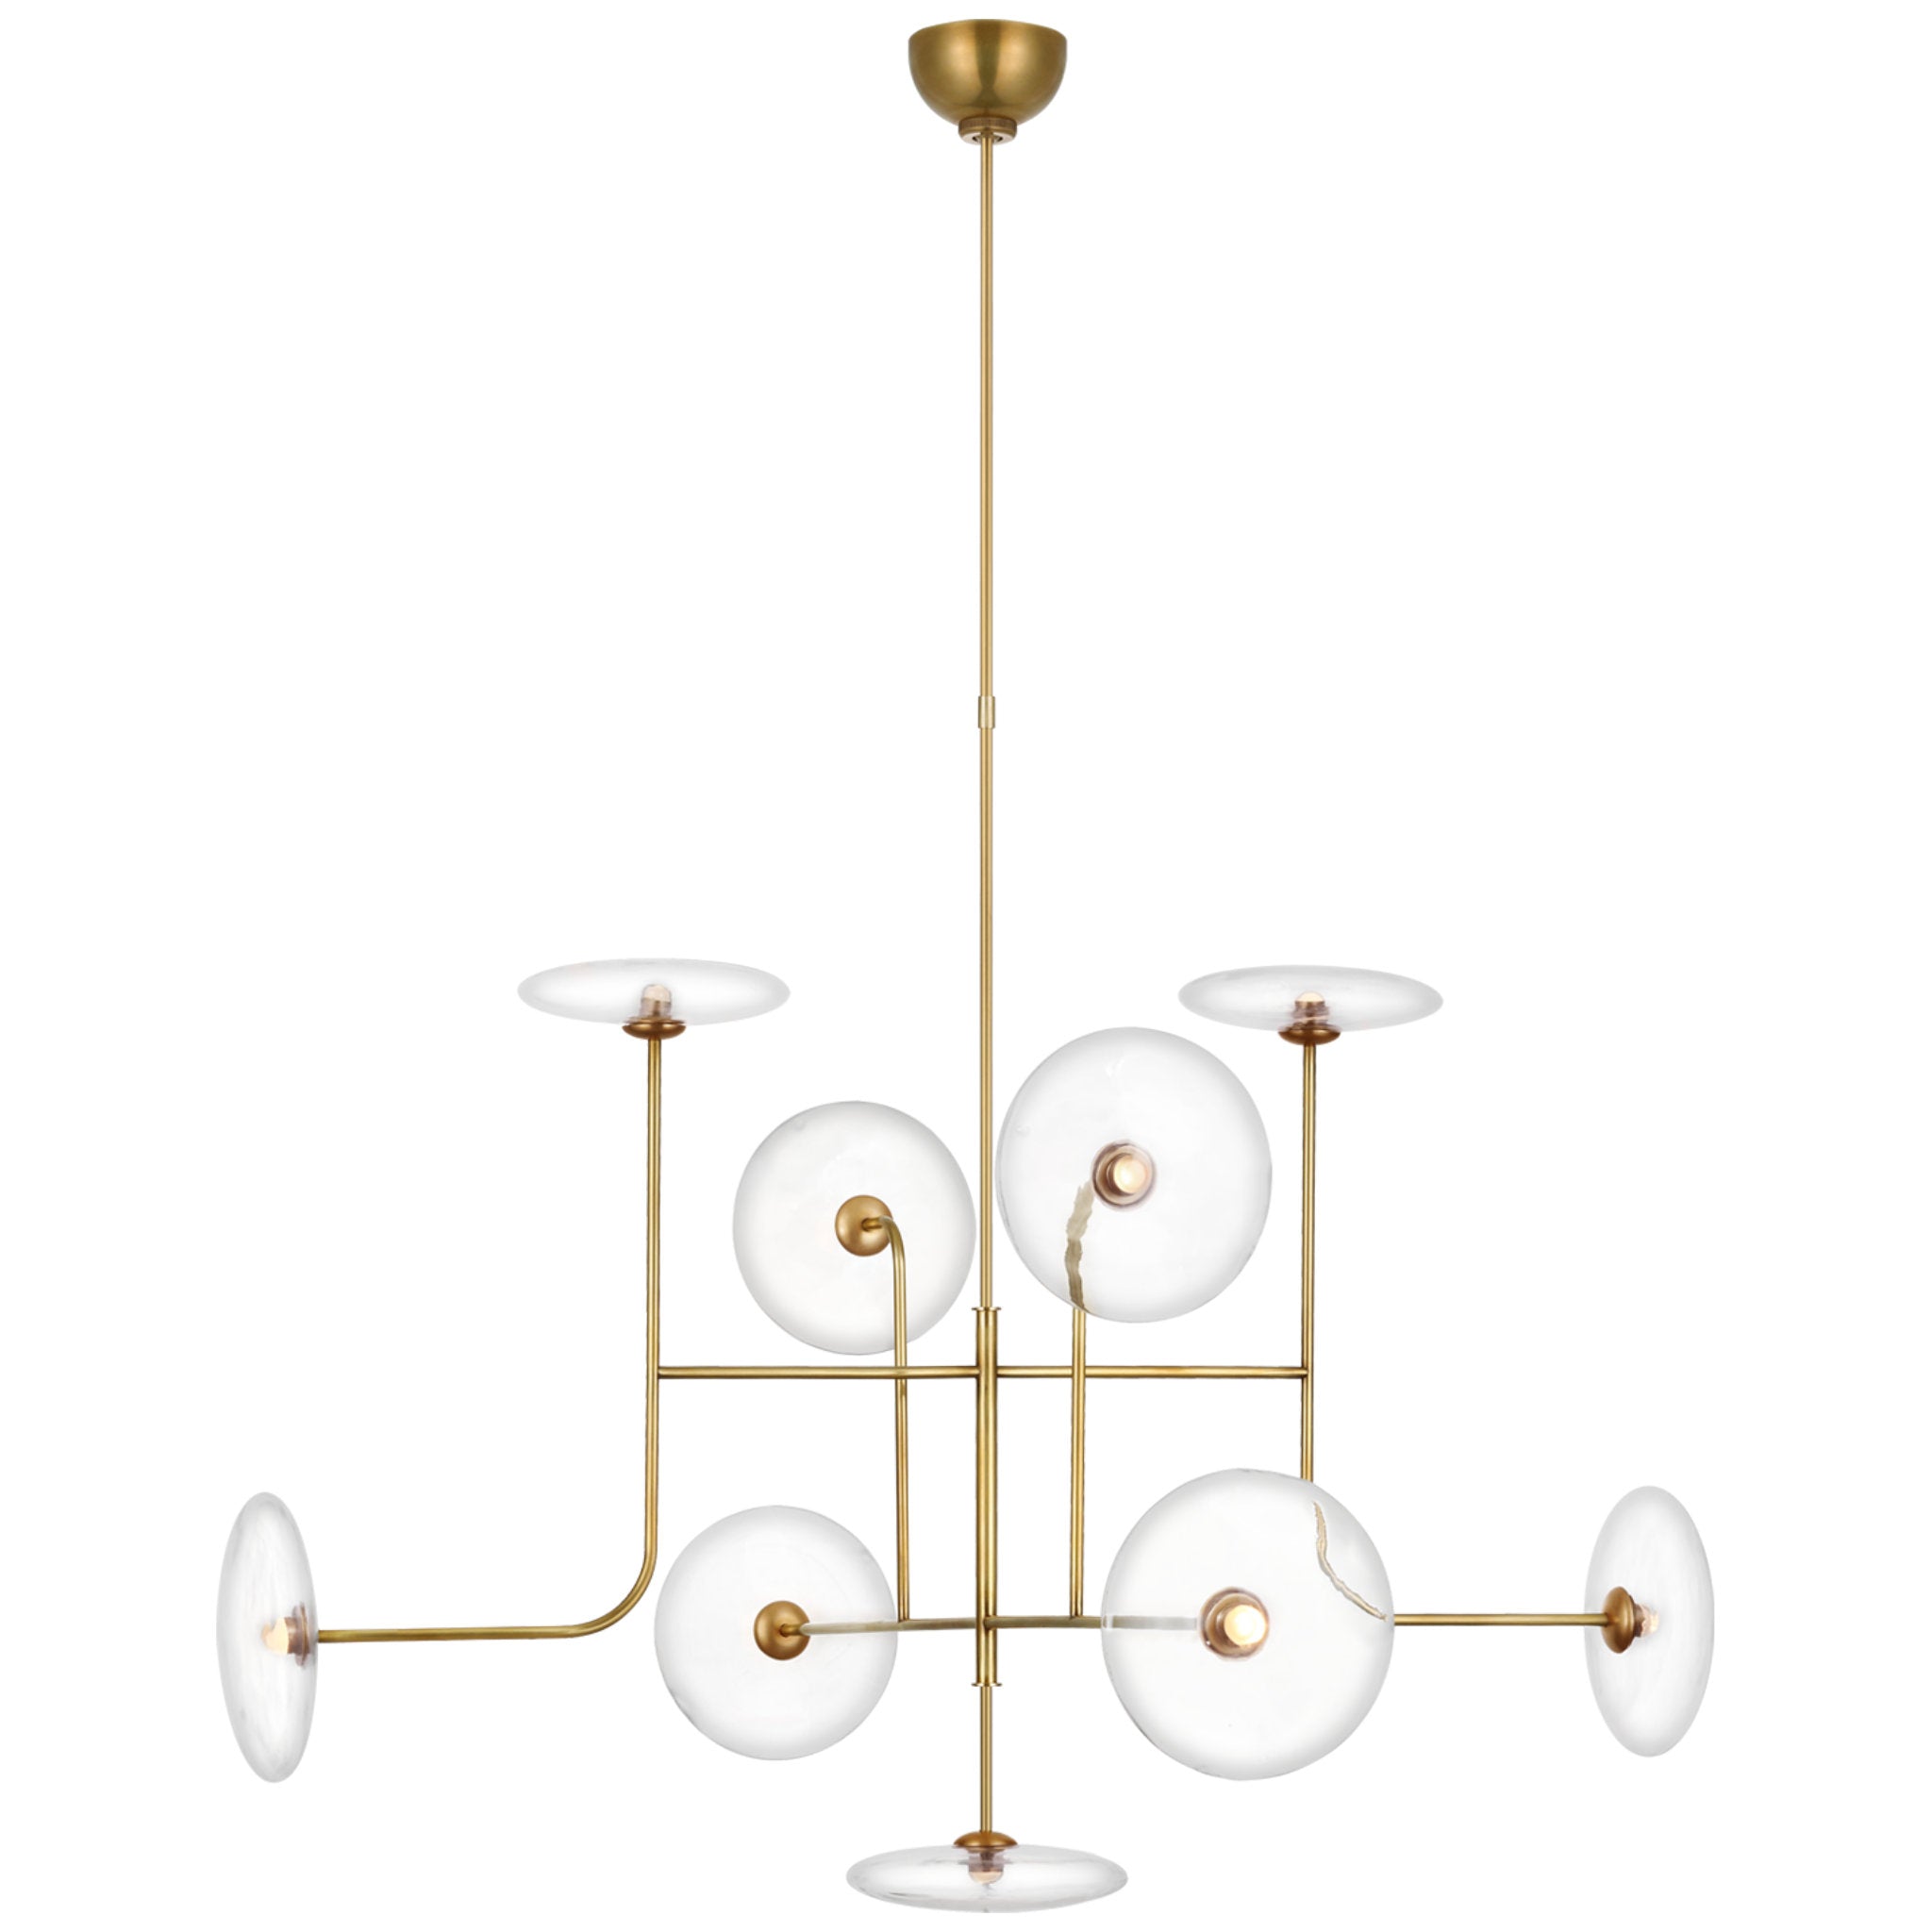 Ian K. Fowler Calvino X-Large Arched Chandelier in Hand-Rubbed Antique Brass with Clear Glass